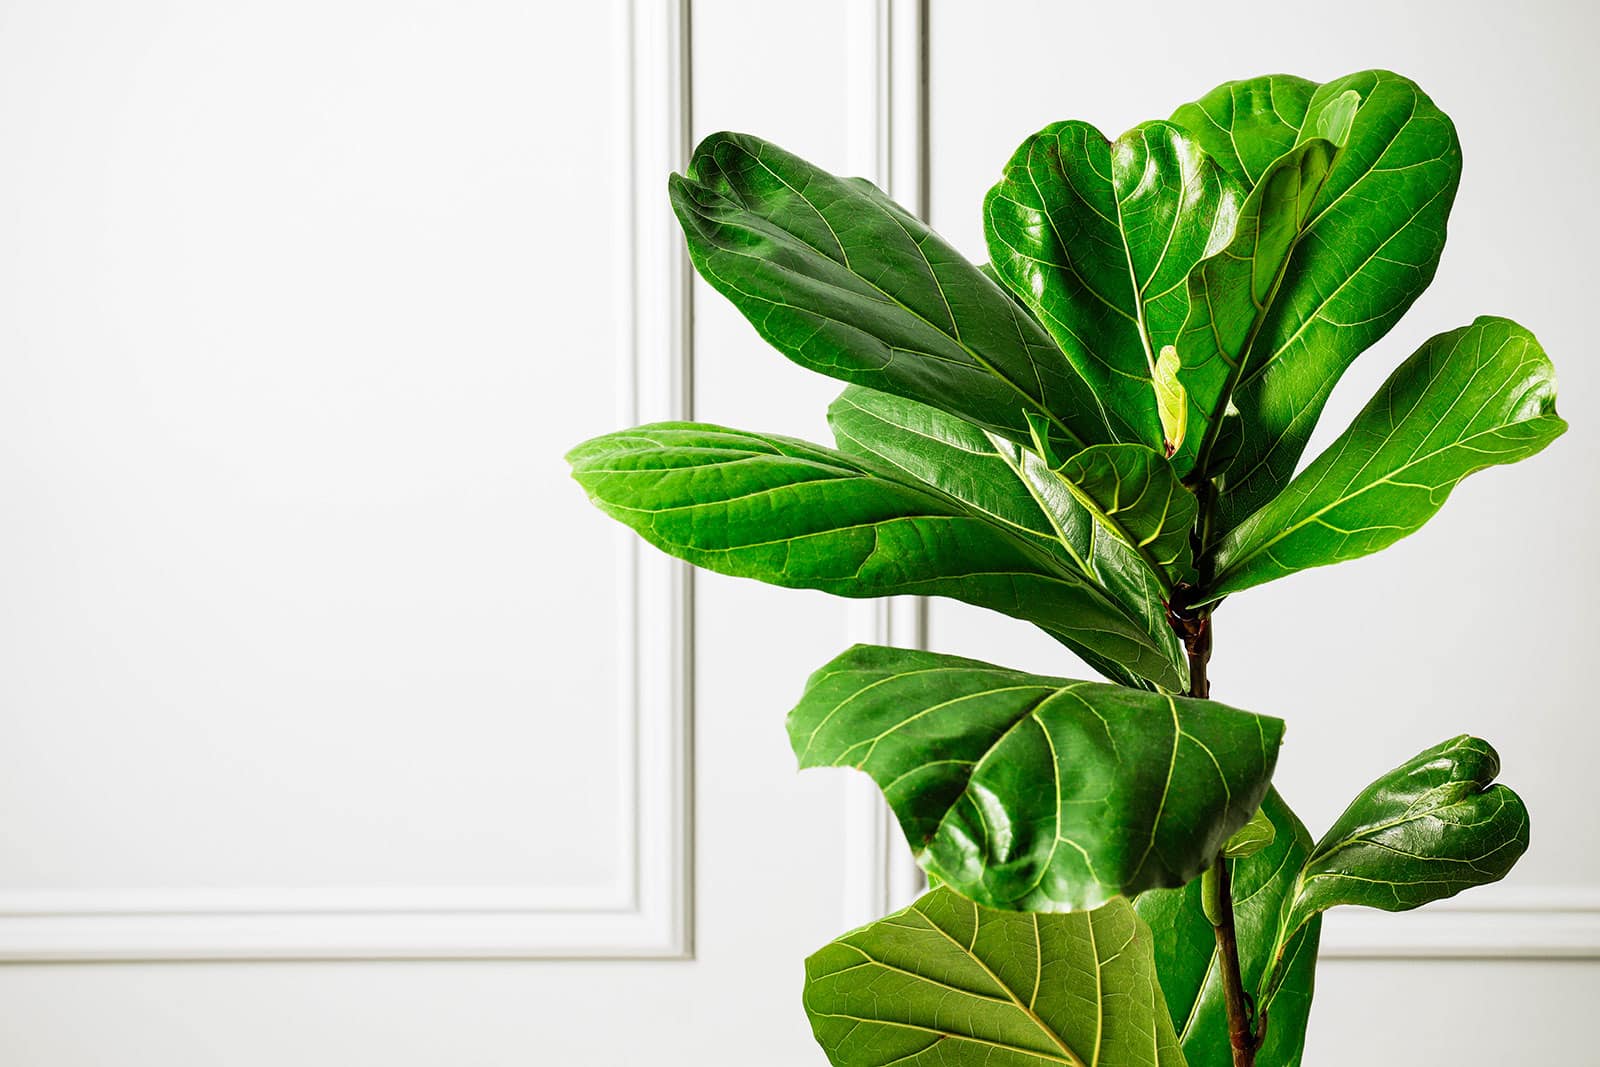 Close-up of large green fiddle leaf fig leaves against a white wall with traditional molding